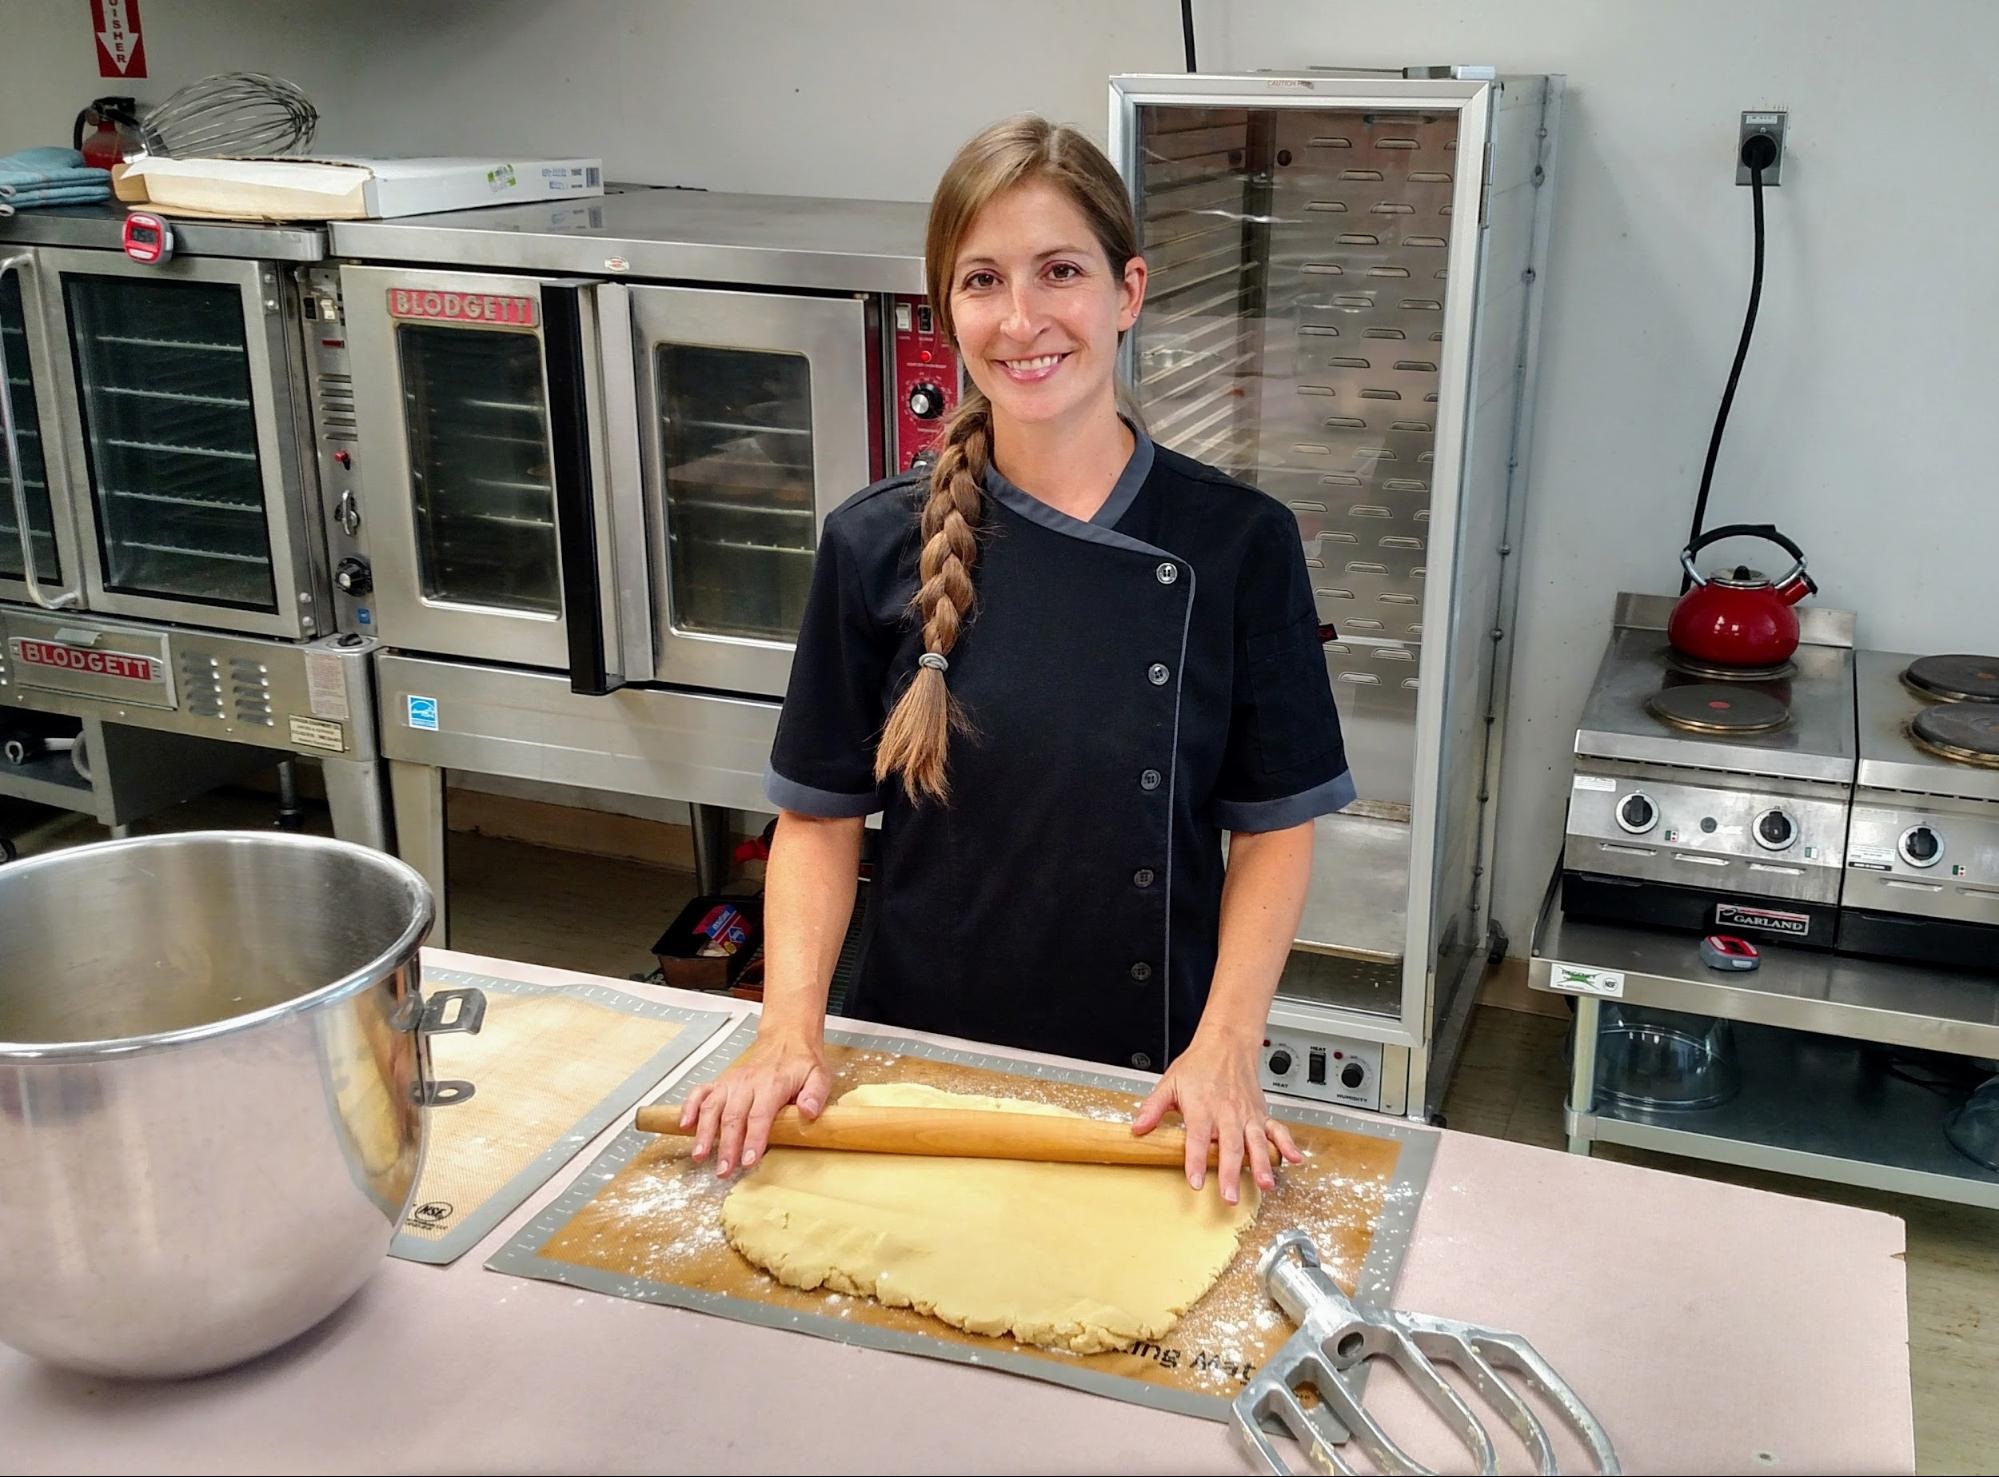 Elizabeth Meyers, Chef and Owner of I d’Eclair! Pastry, stands above a sheet of dough with rolling pin in hand.